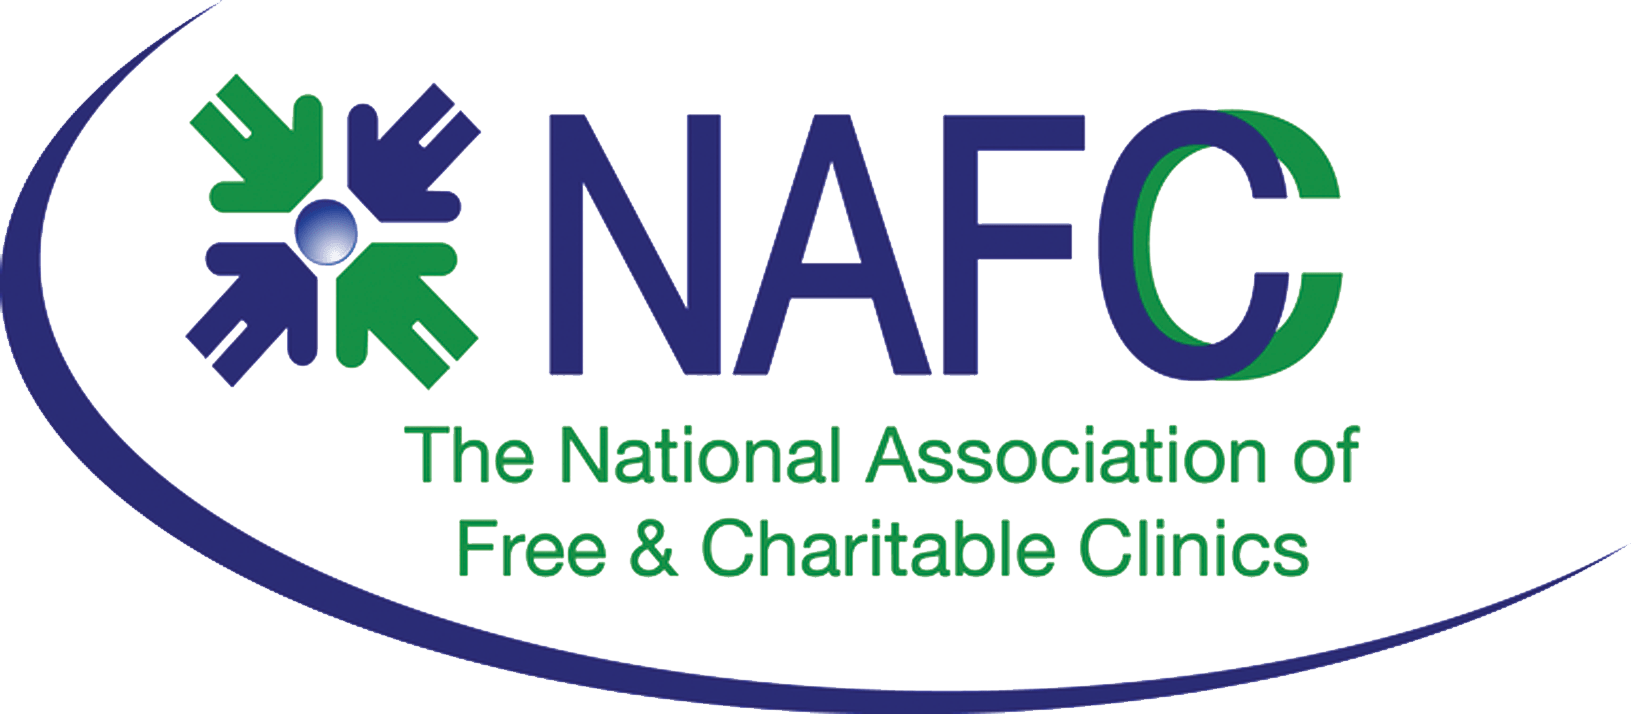 National Association of Free and Charitable Clinics Logo